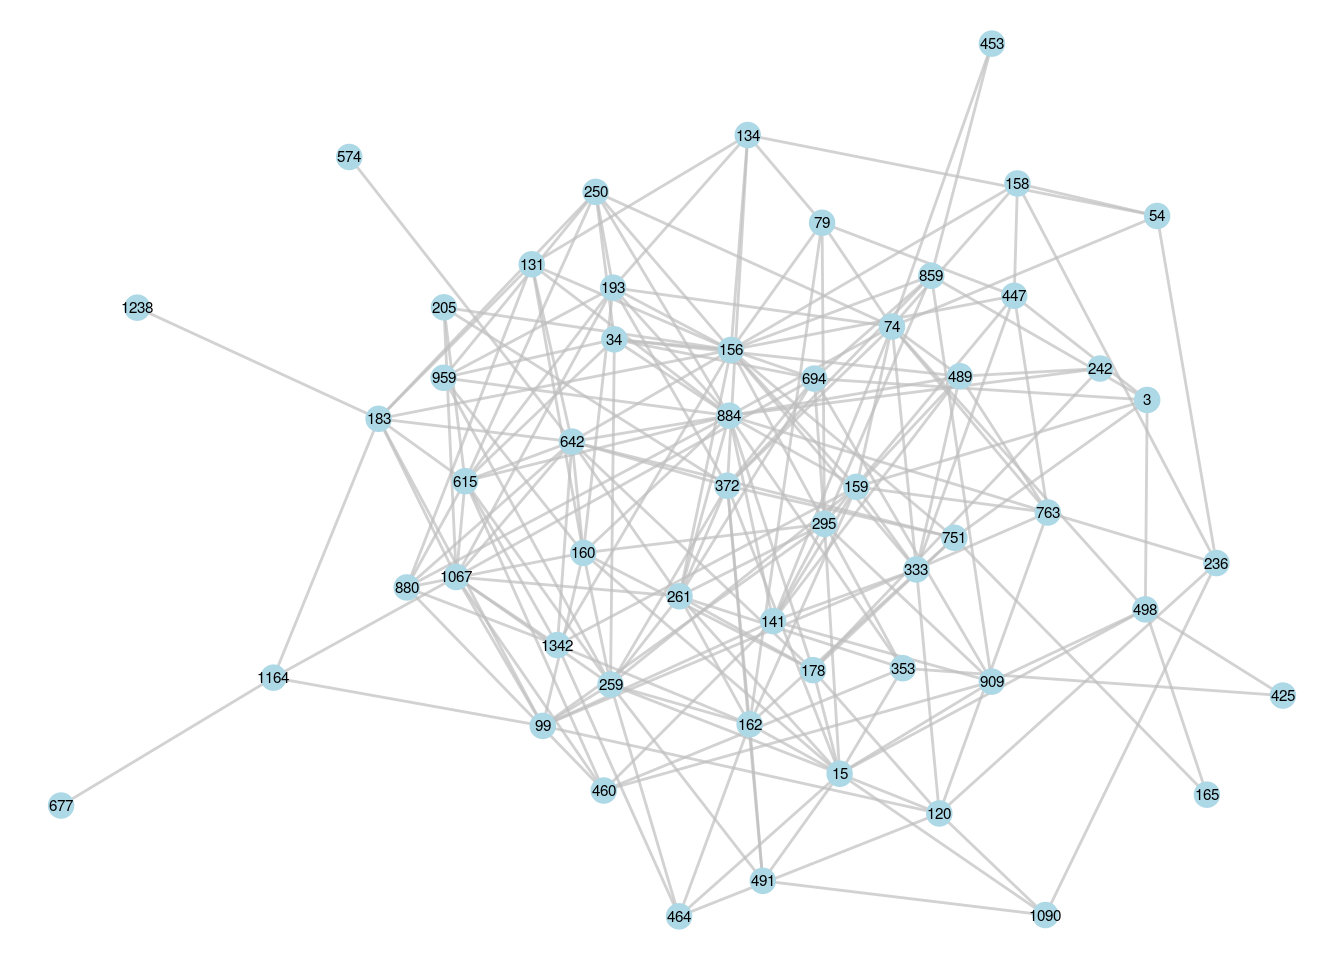 The induced subgraph of the DMI department in our French workplace